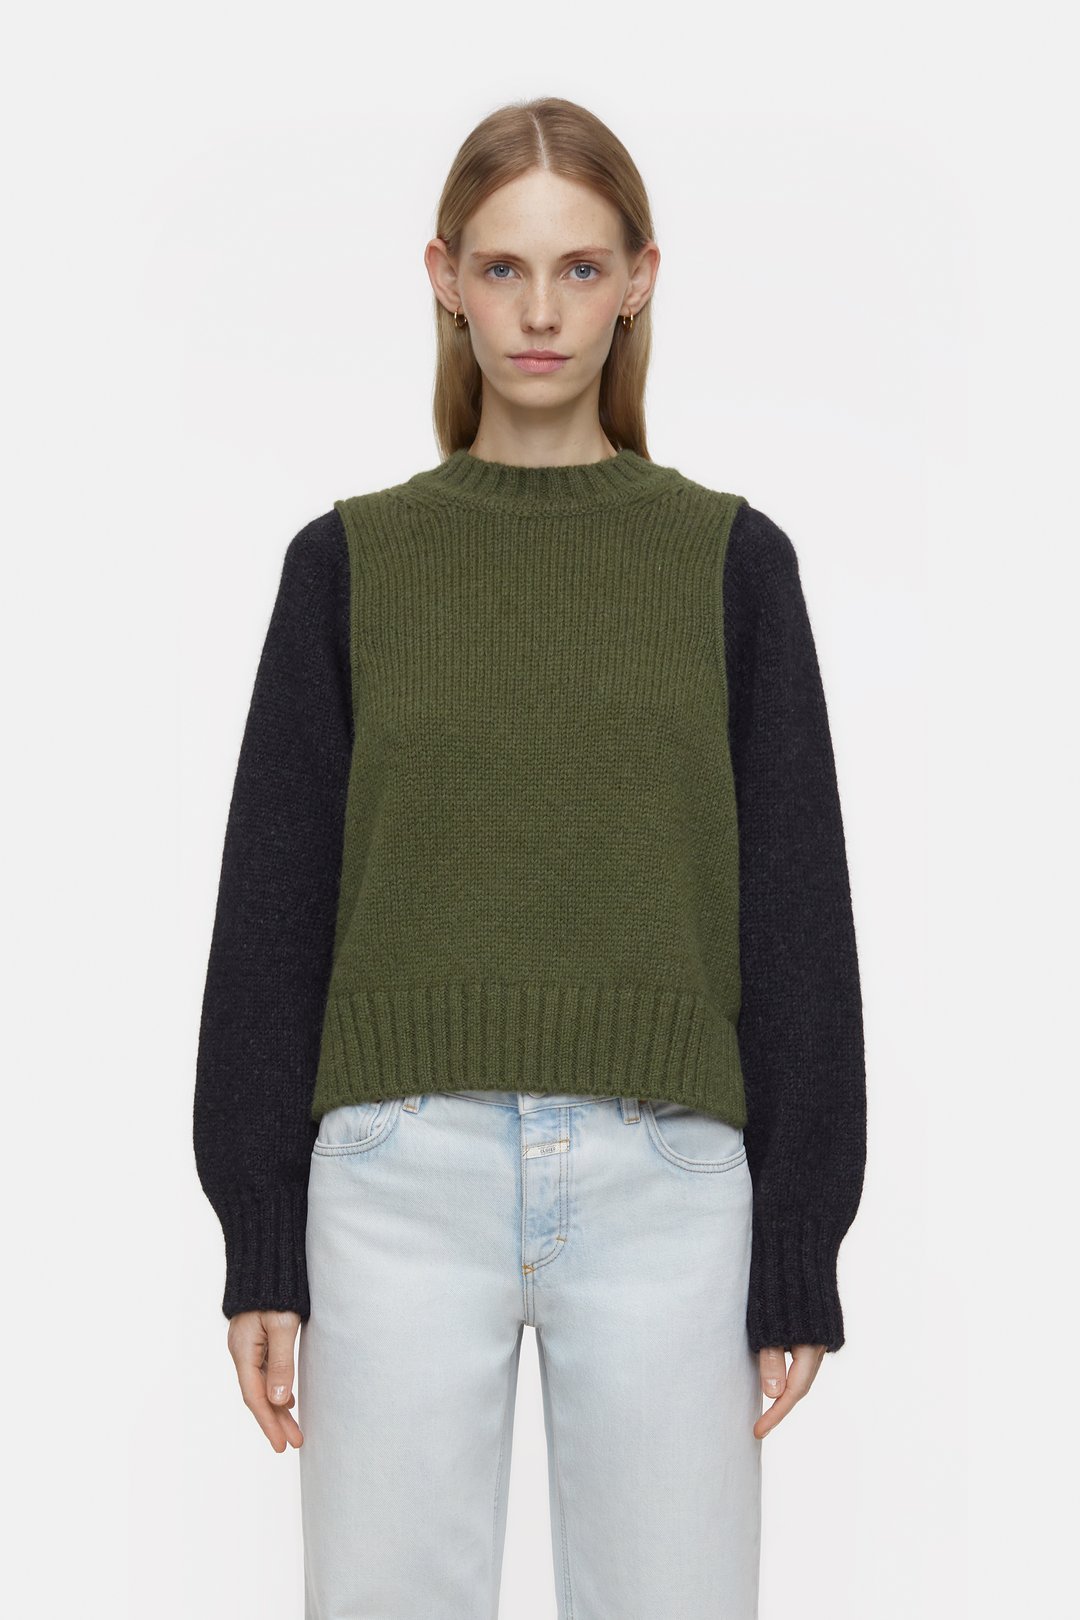 CLOSED WOMENS CREW NECK - INDUSTRIAL GREEN